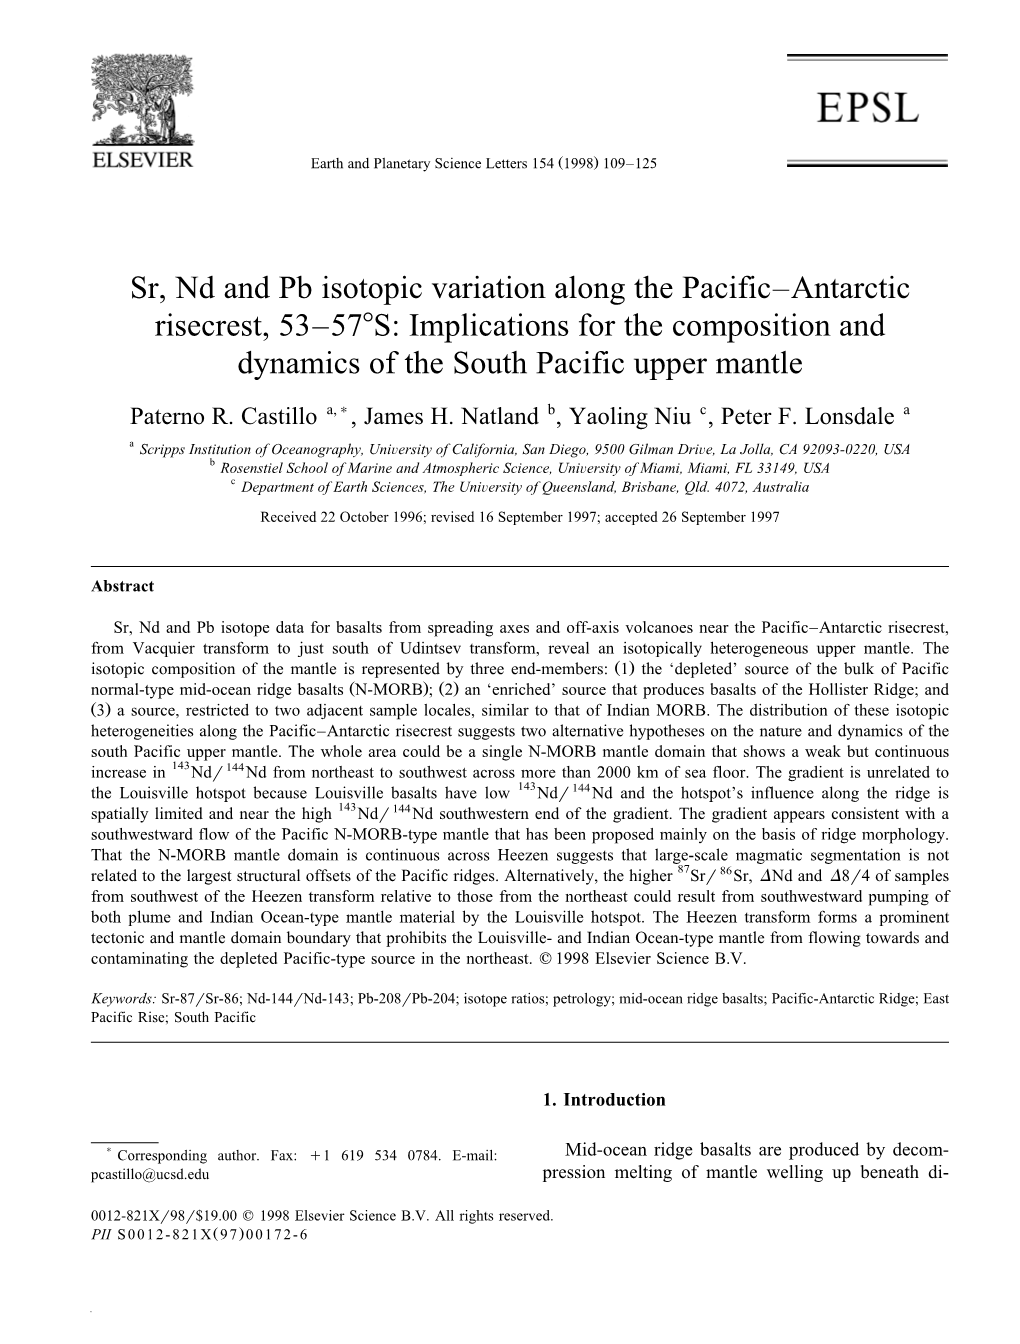 Sr, Nd and Pb Isotopic Variation Along the Pacific–Antarctic Risecrest, 53